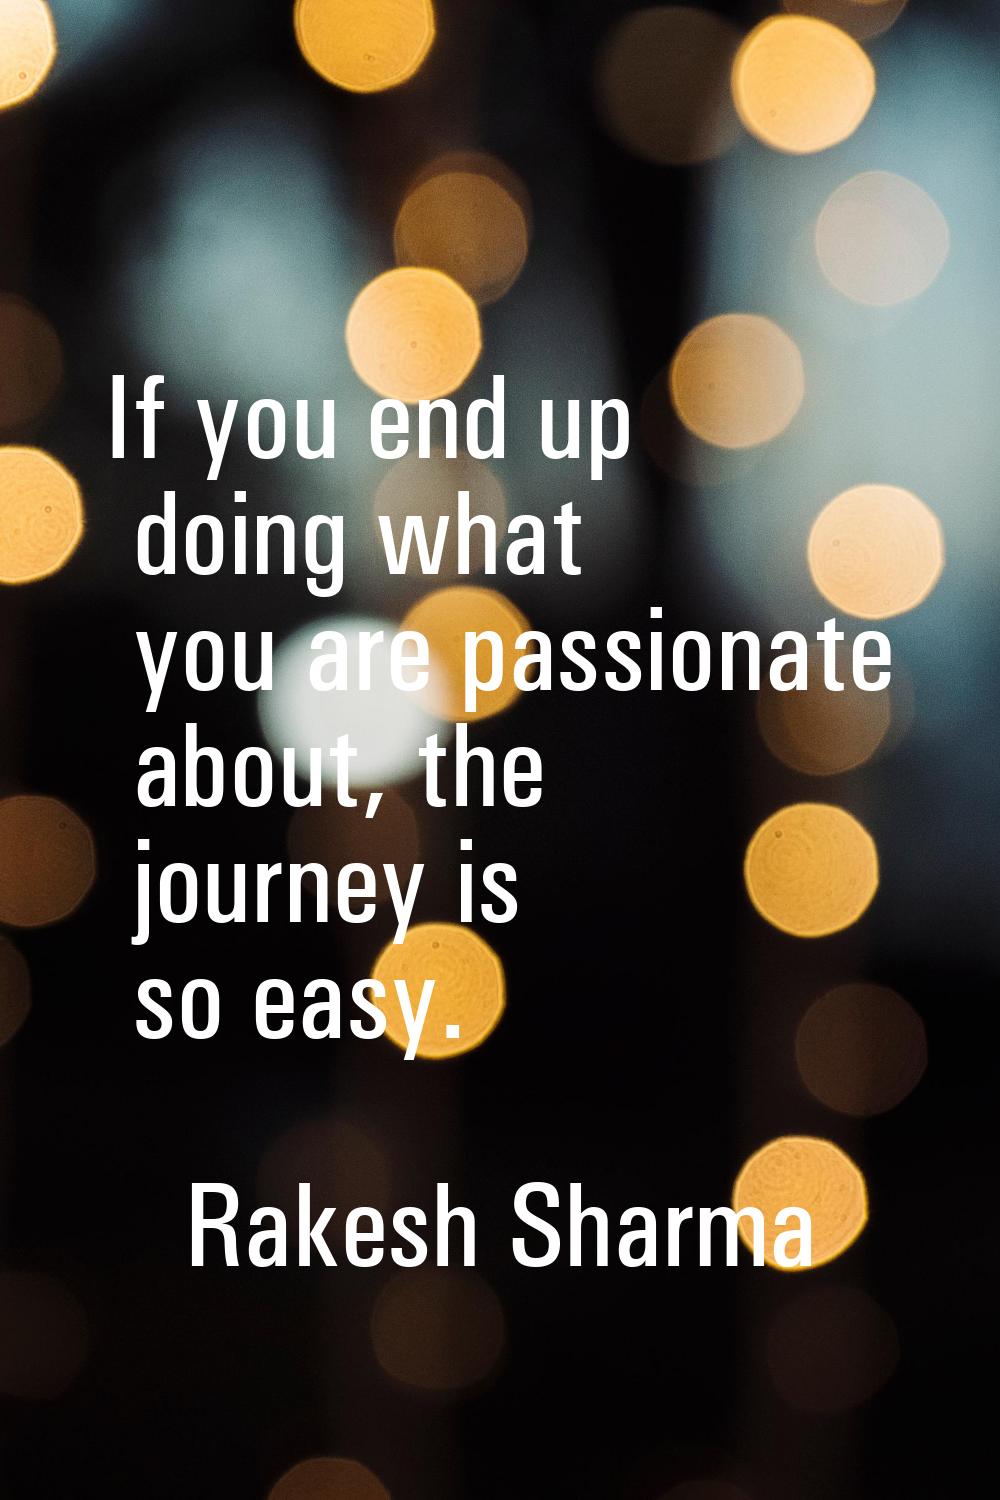 If you end up doing what you are passionate about, the journey is so easy.